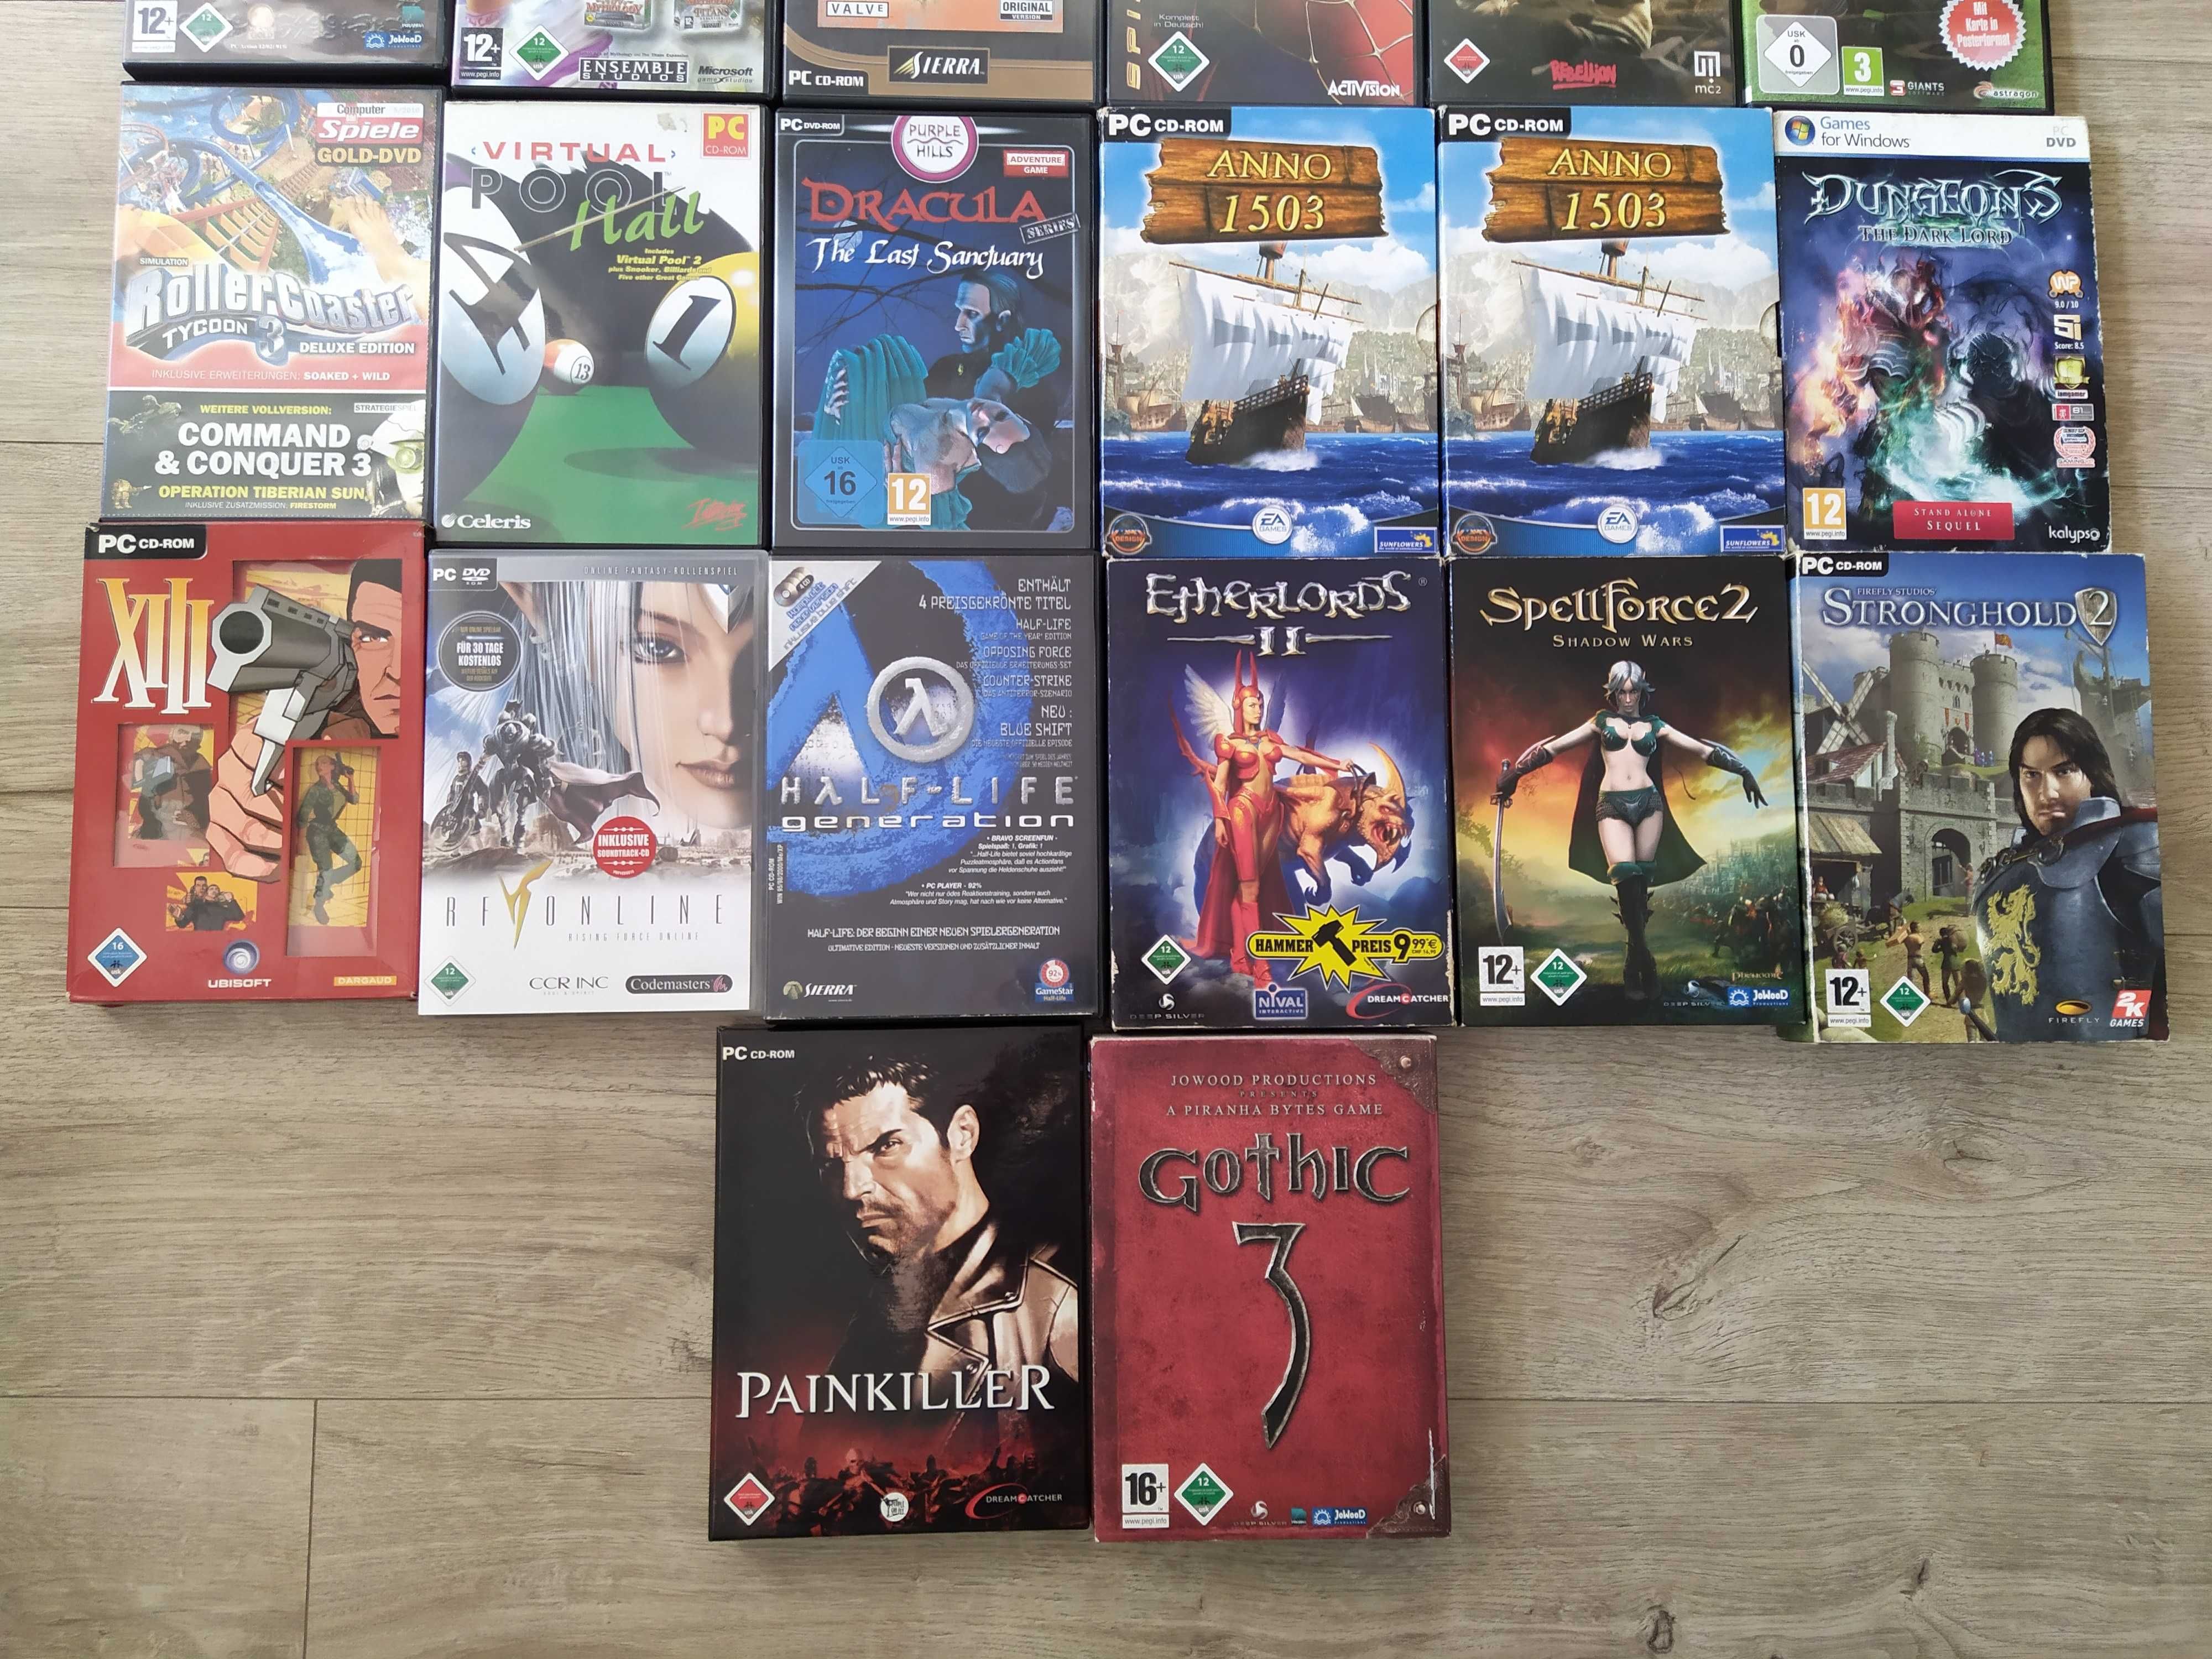 Gry PC - Spider-man, XIII, Gothic, Painkiller, Prince of Persia,